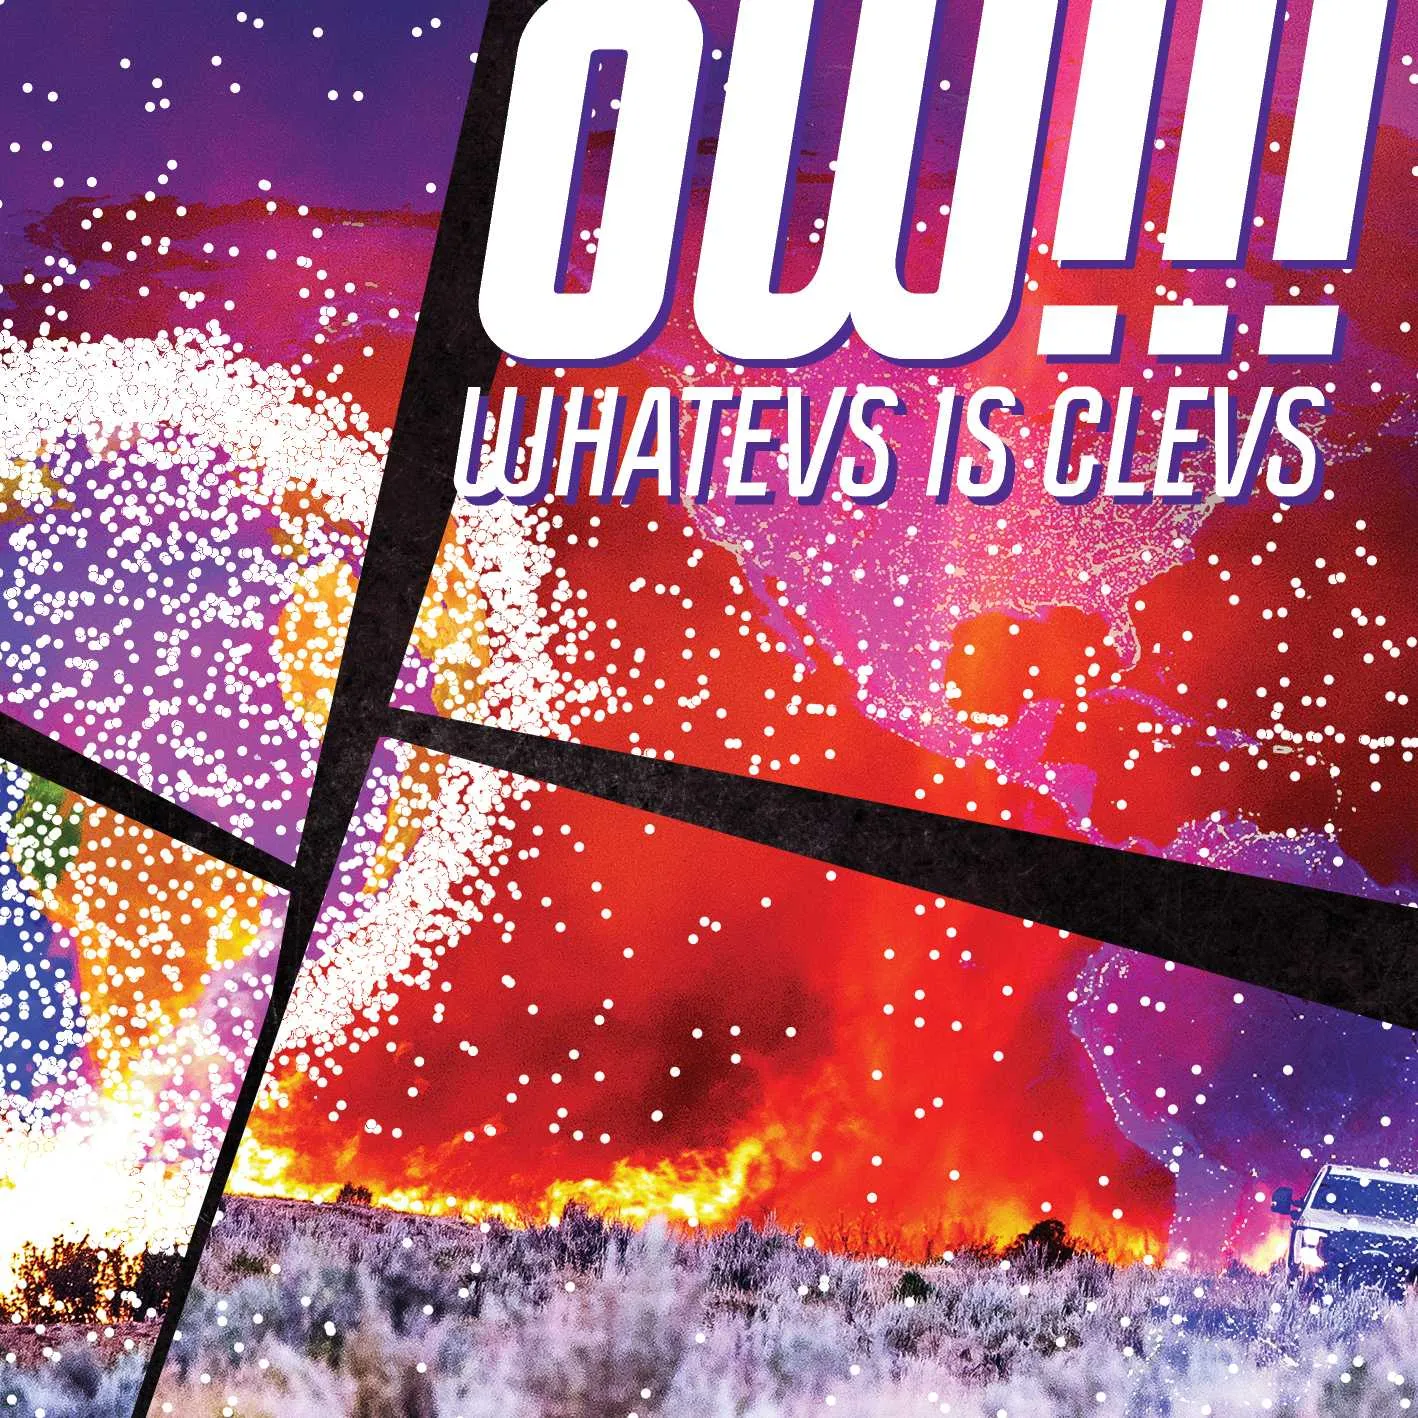 Album cover for “Whatevs Is Clevs” by OWTRIPLEBANG